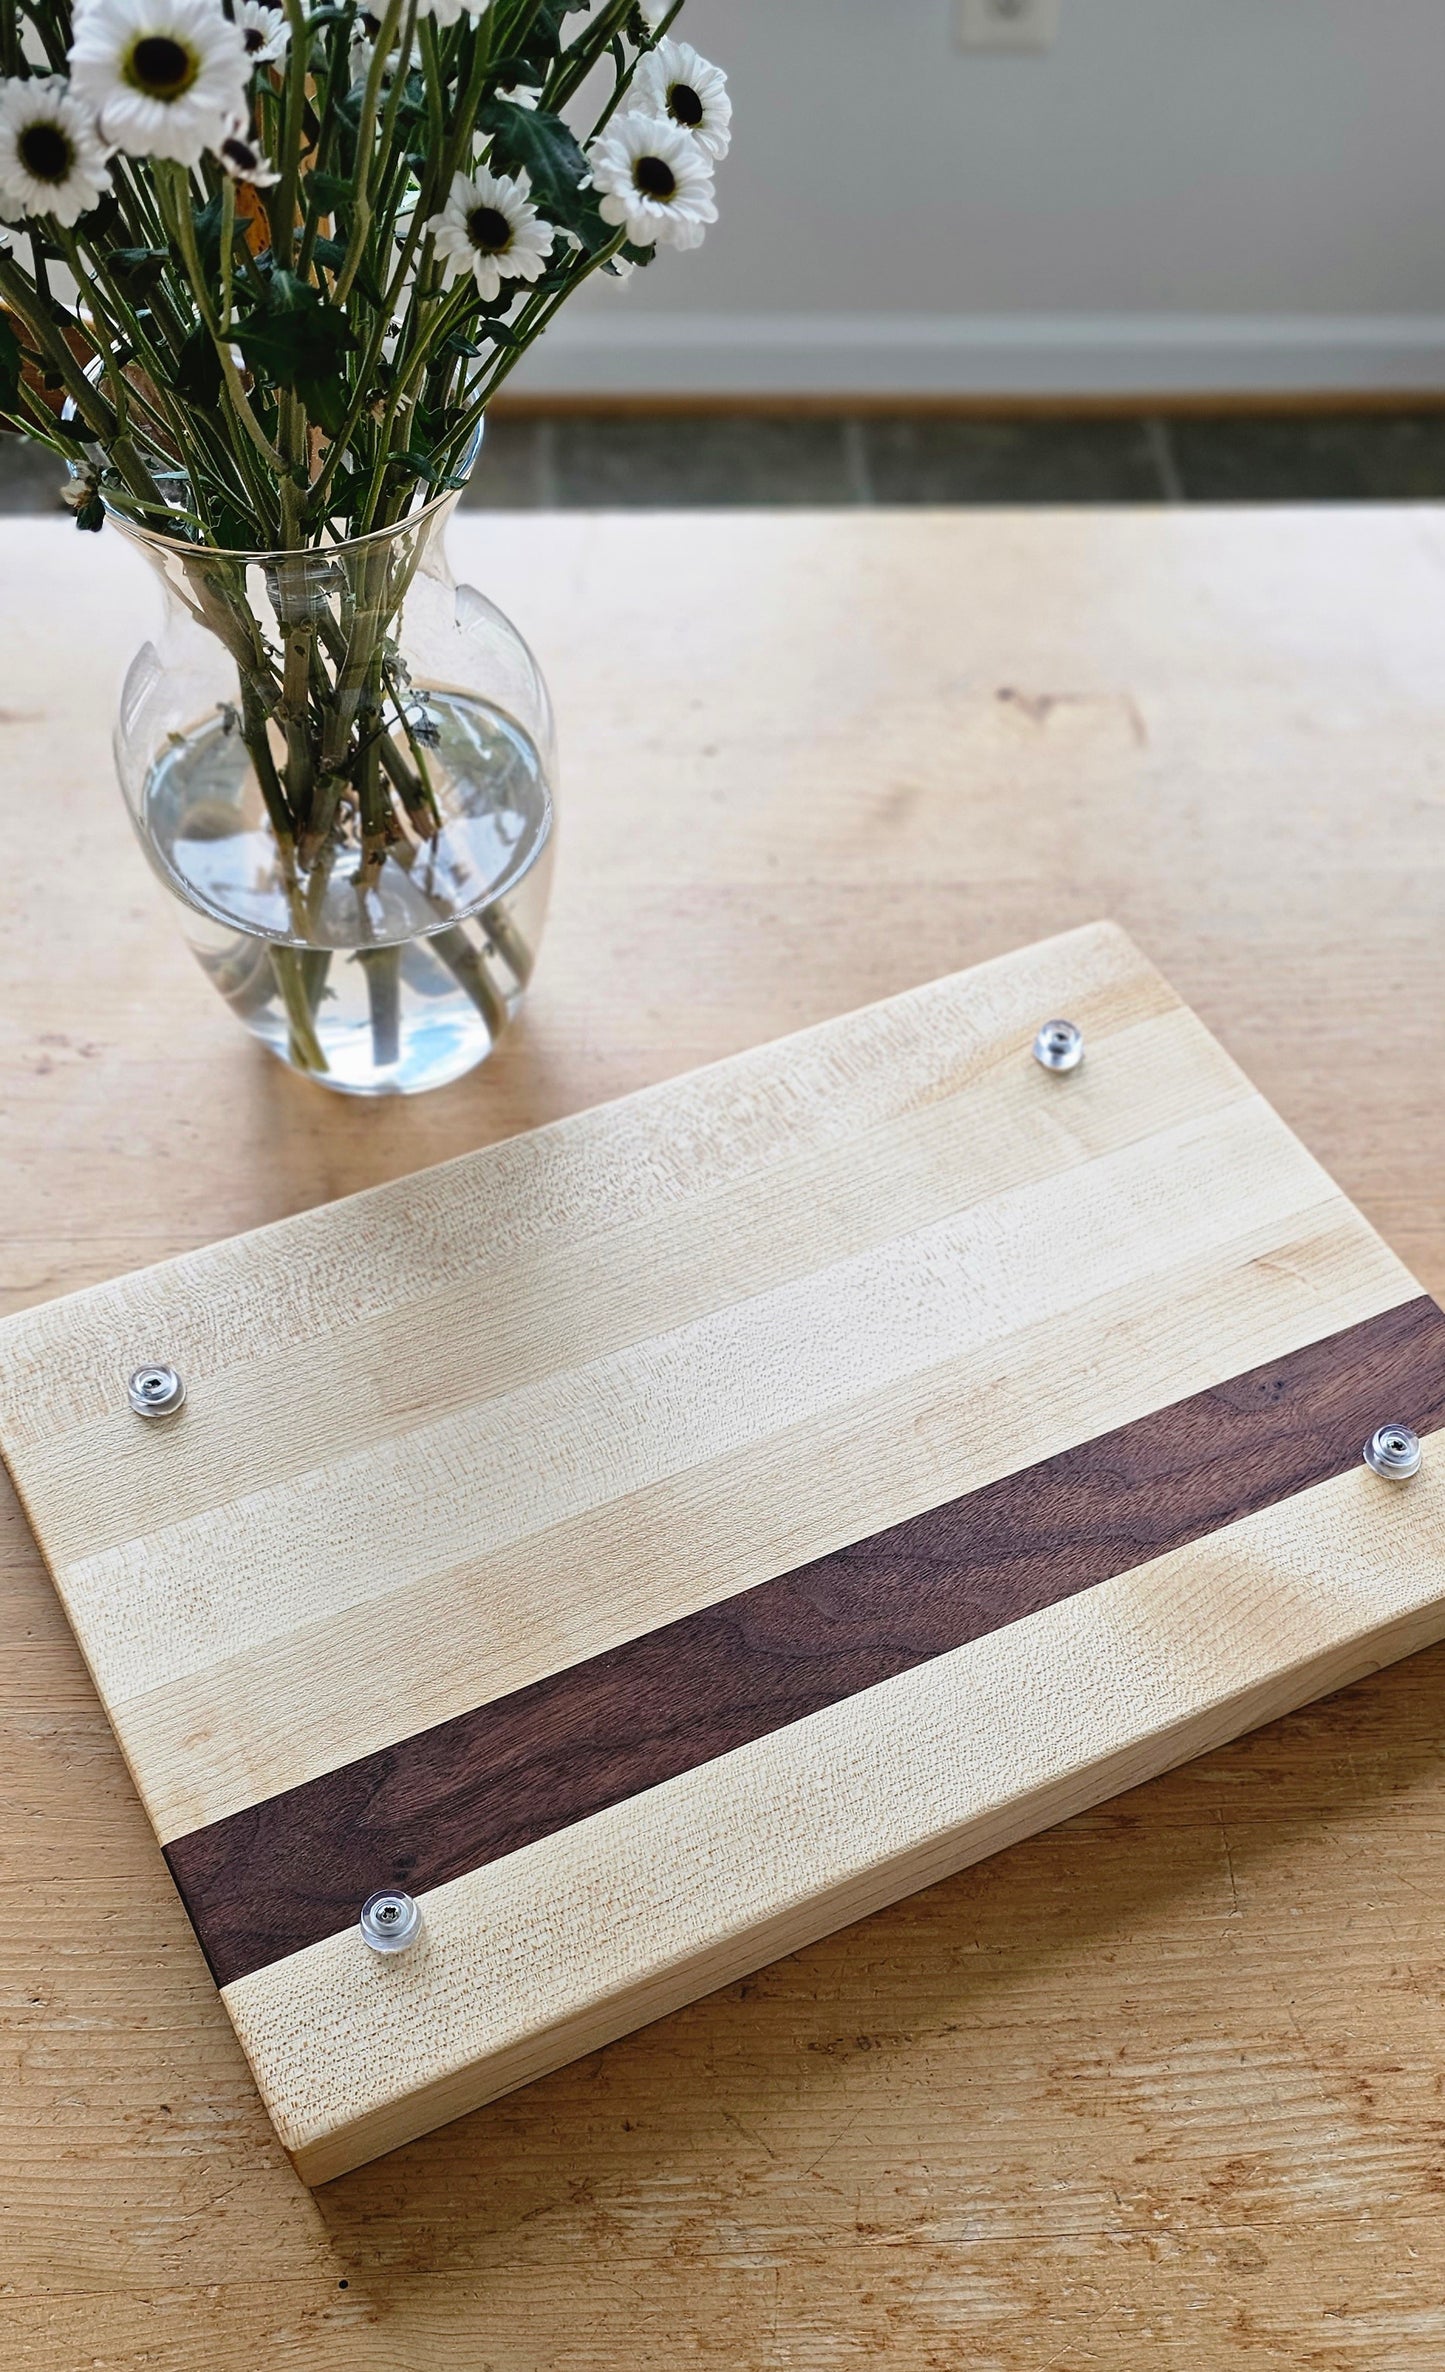 Doodleware Cutting Boards - Bon Appetit in Vietnamese (Tiếng Việt)